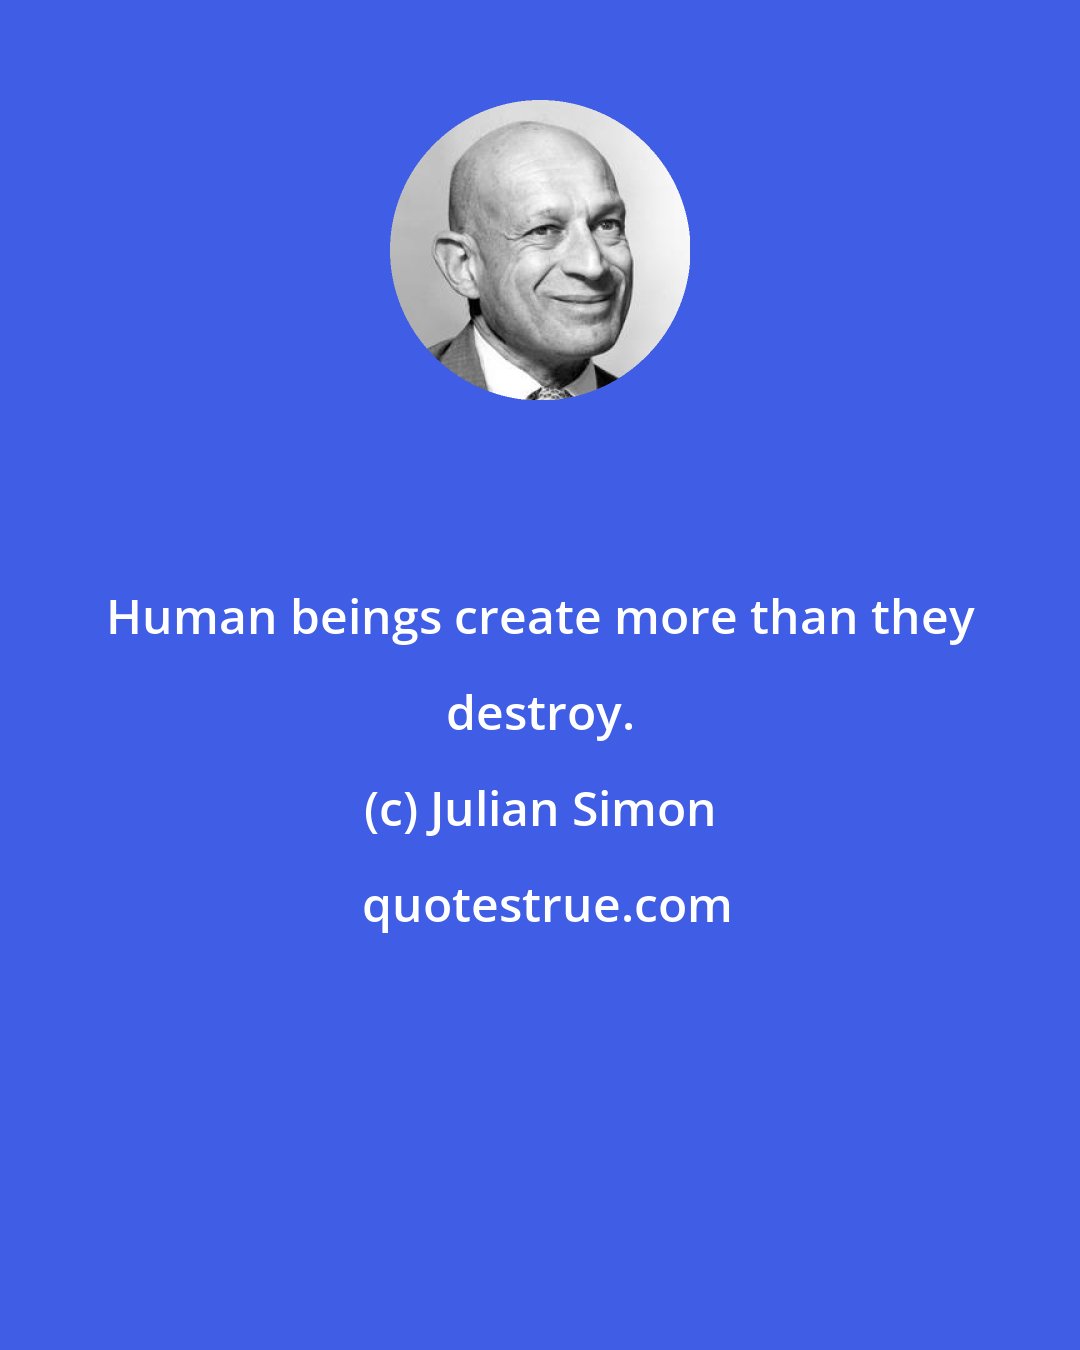 Julian Simon: Human beings create more than they destroy.